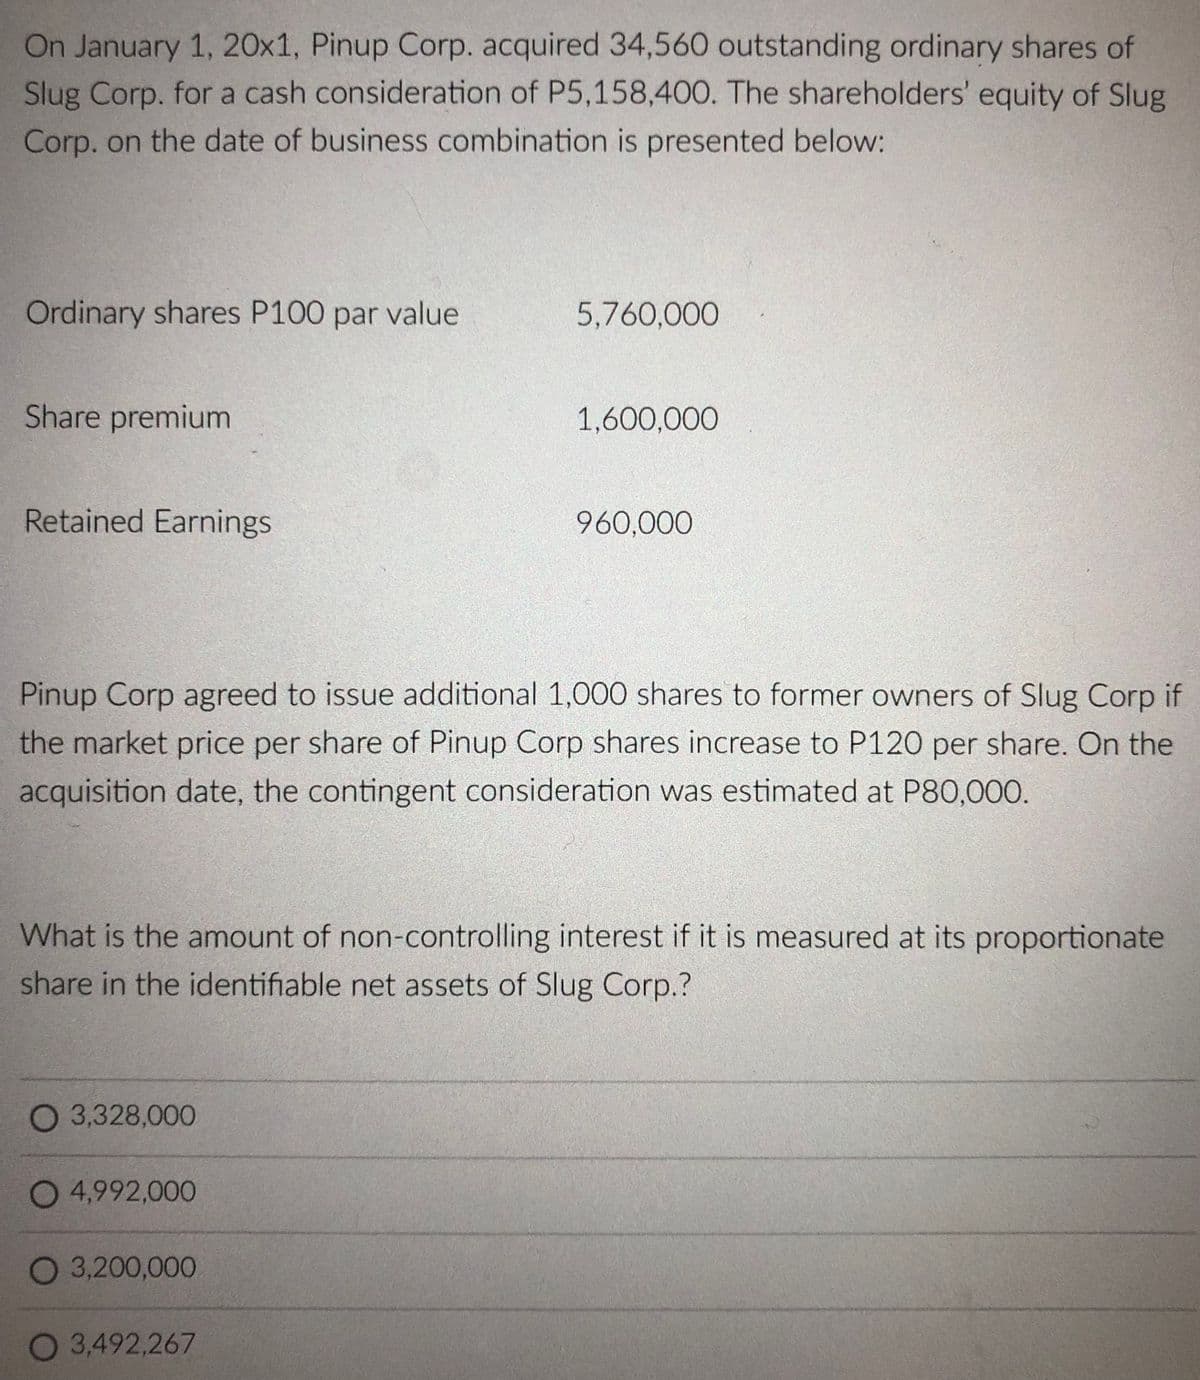 On January 1, 20x1, Pinup Corp. acquired 34,560 outstanding ordinary shares of
Slug Corp. for a cash consideration of P5,158,400. The shareholders' equity of Slug
Corp. on the date of business combination is presented below:
Ordinary shares P100 par value
5,760,000
Share premium
1,600,000
Retained Earnings
960,000
Pinup Corp agreed to issue additional 1,000 shares to former owners of Slug Corp if
the market price per share of Pinup Corp shares increase to P120 per share. On the
acquisition date, the contingent consideration was estimated at P80,000.
What is the amount of non-controlling interest if it is measured at its proportionate
share in the identifiable net assets of Slug Corp.?
O 3,328,000
O 4,992,000
O 3,200,000
O 3,492,267
